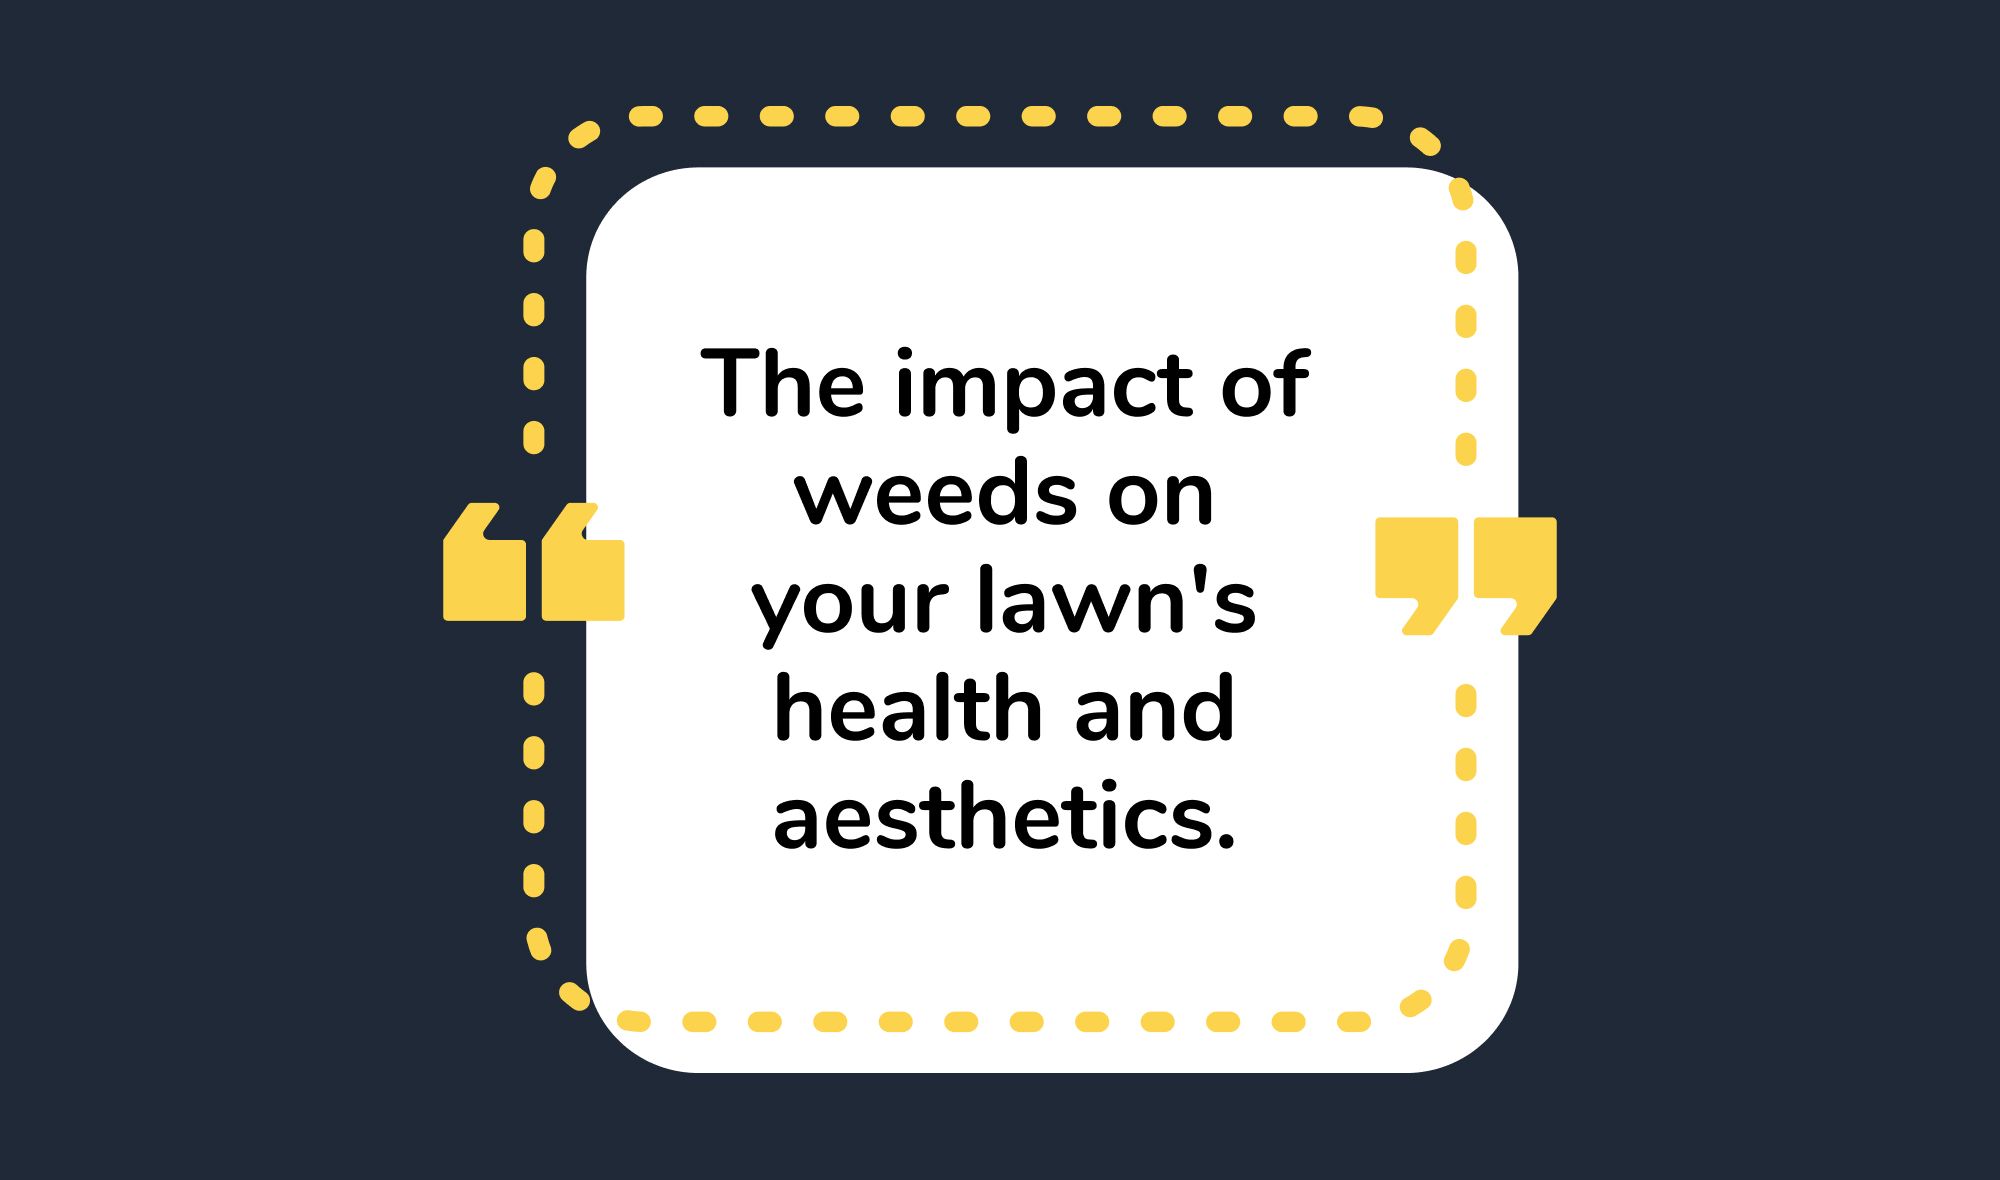 The impact of weeds on your lawn's health and aesthetics.